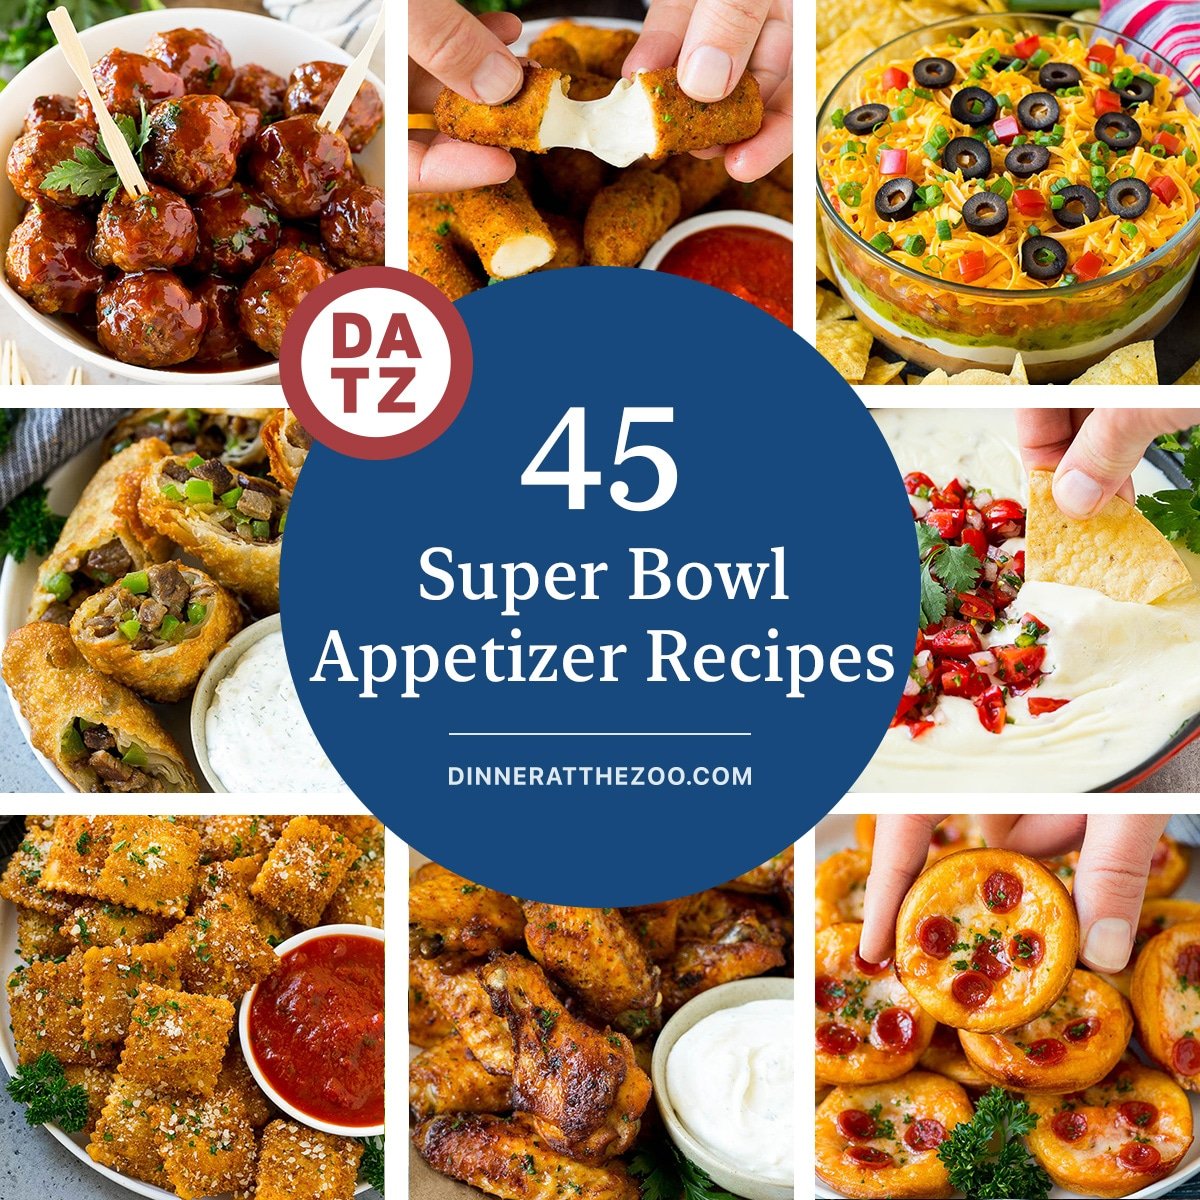 Several pictures of Super Bowl appetizer recipes including 7 layer dip, baked chicken wings and Philly cheesesteak egg rolls.